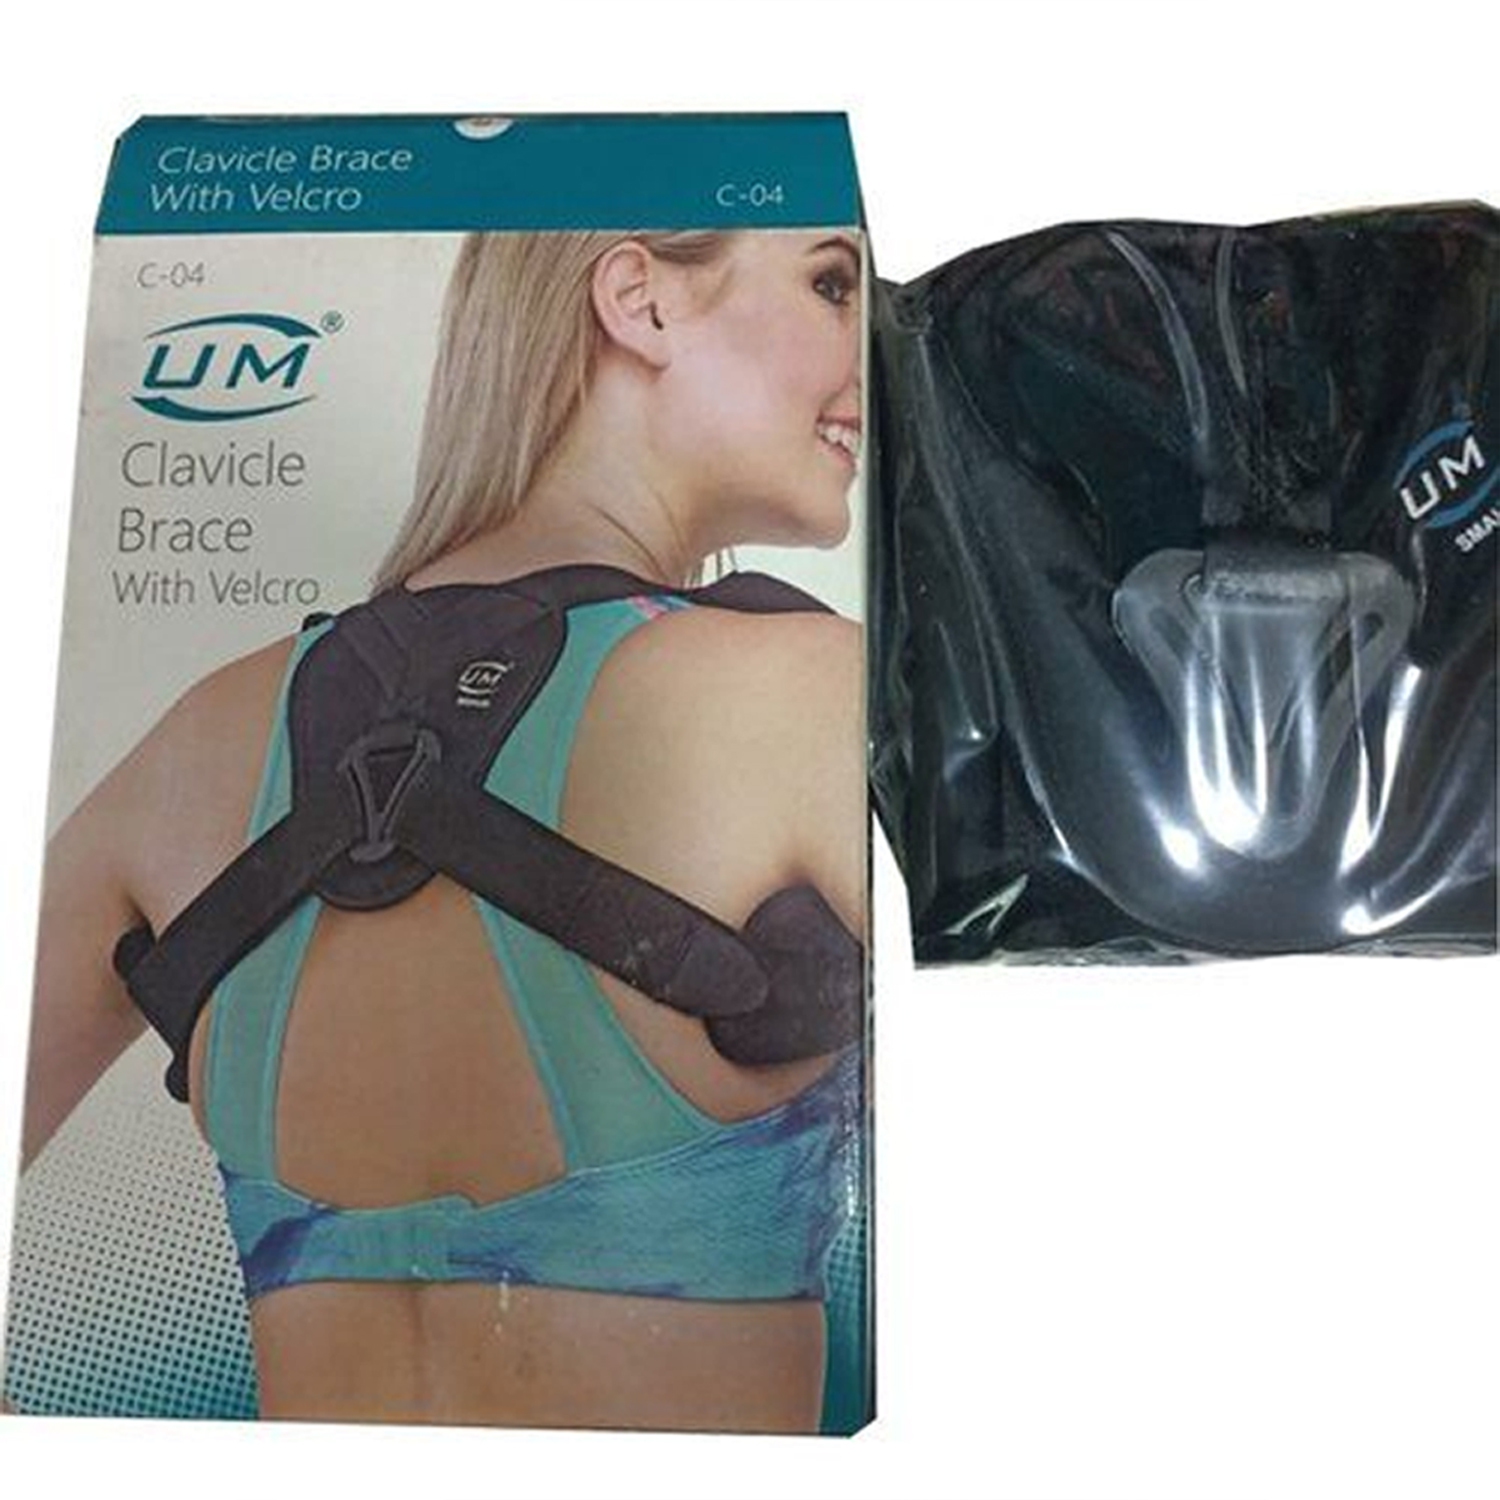 Clavicle Brace Posture Corrector Effective and Comfortable Posture